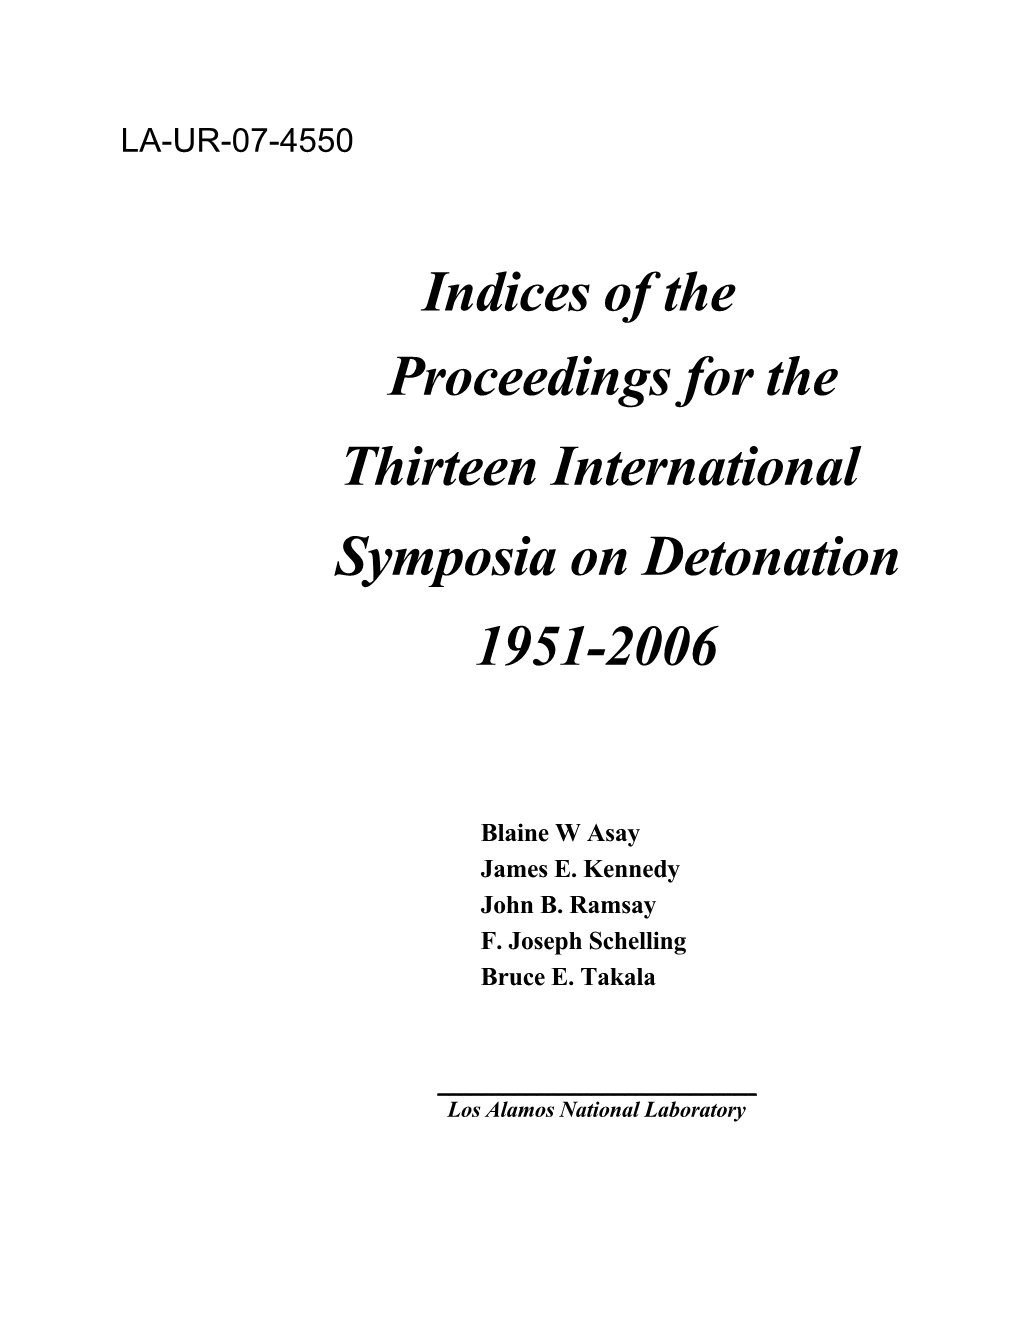 Indices of the Proceedings for the Thirteen International Symposia on Detonation 1951-2006